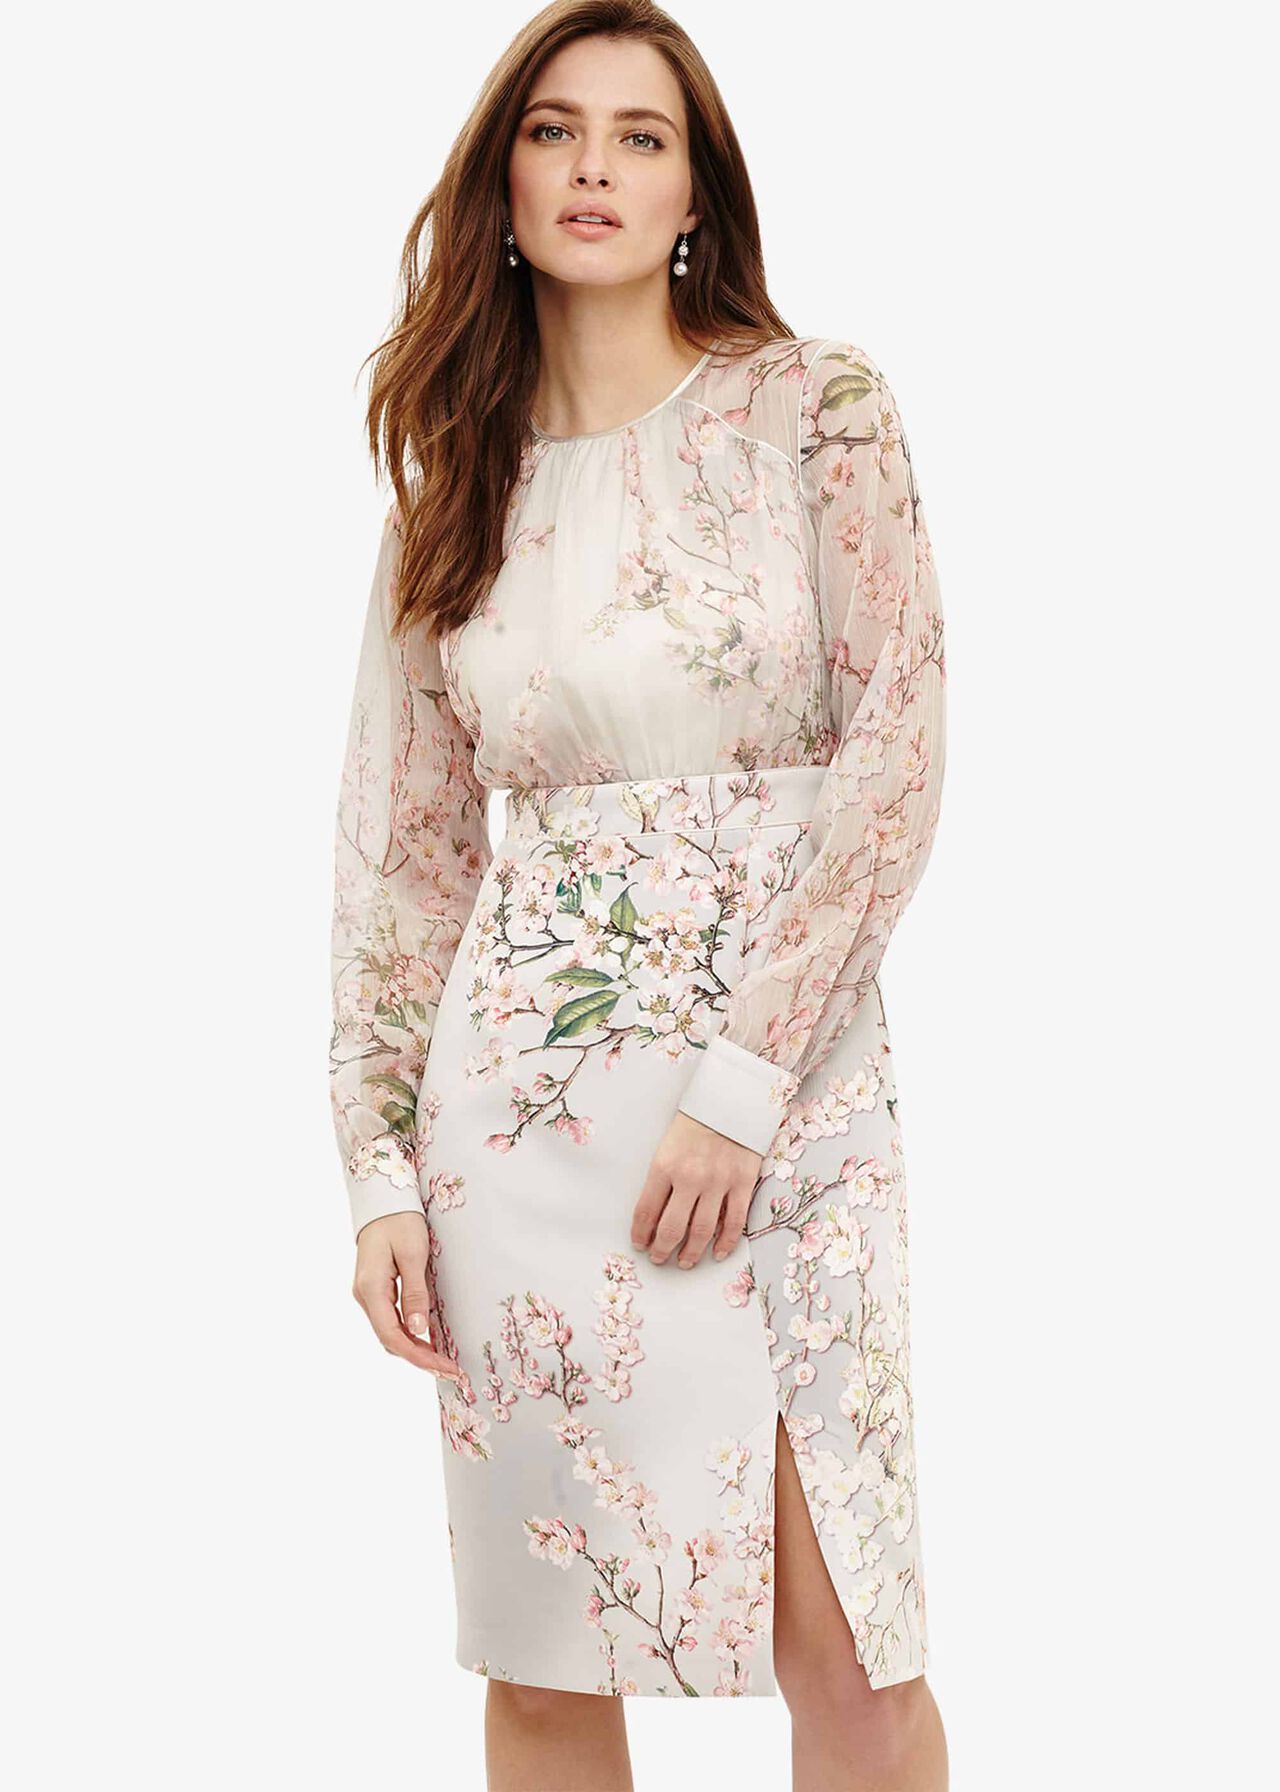 Nissa Floral Dress | Phase Eight